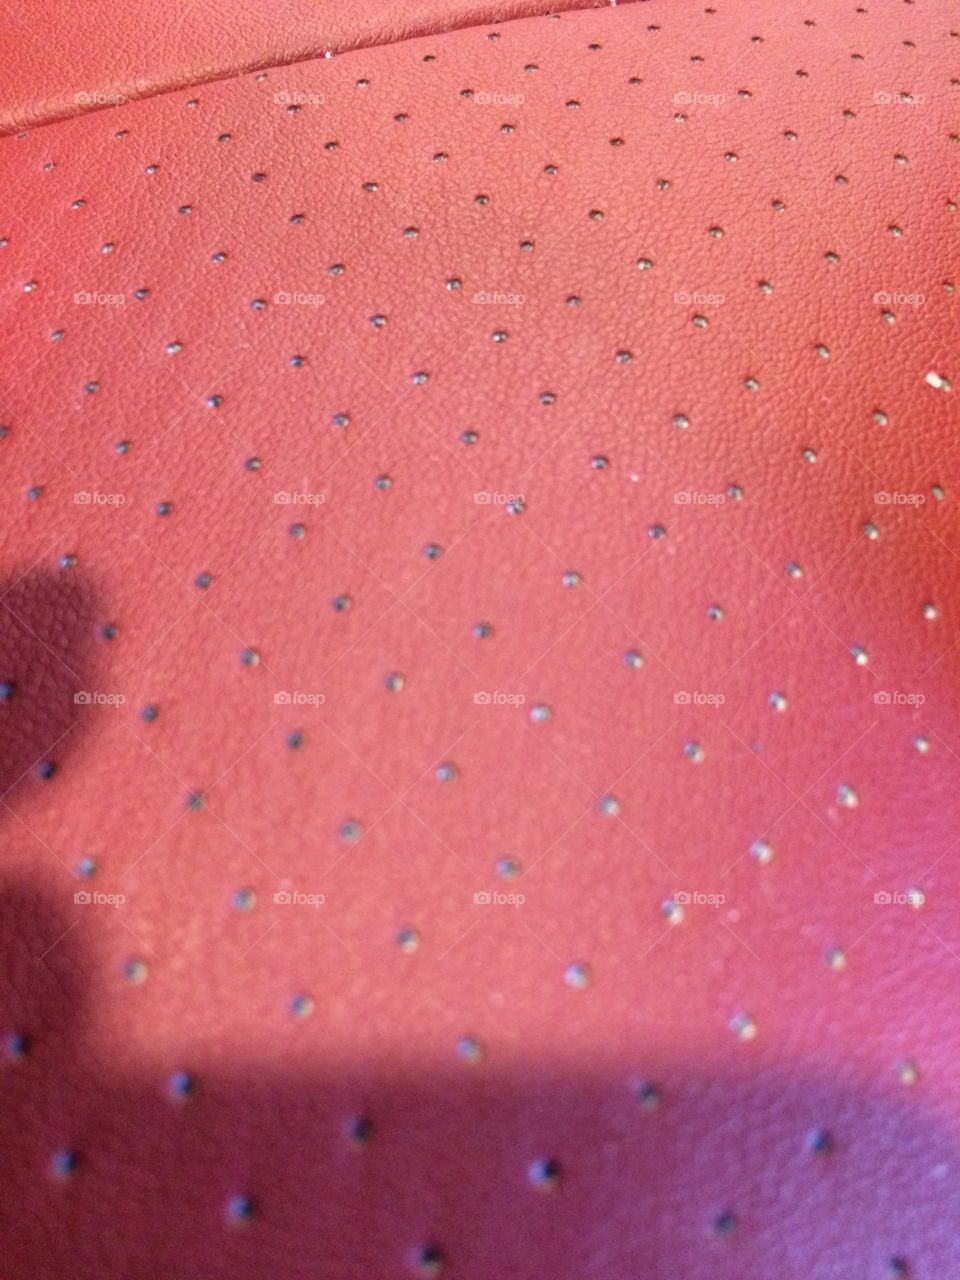 Guess this texture